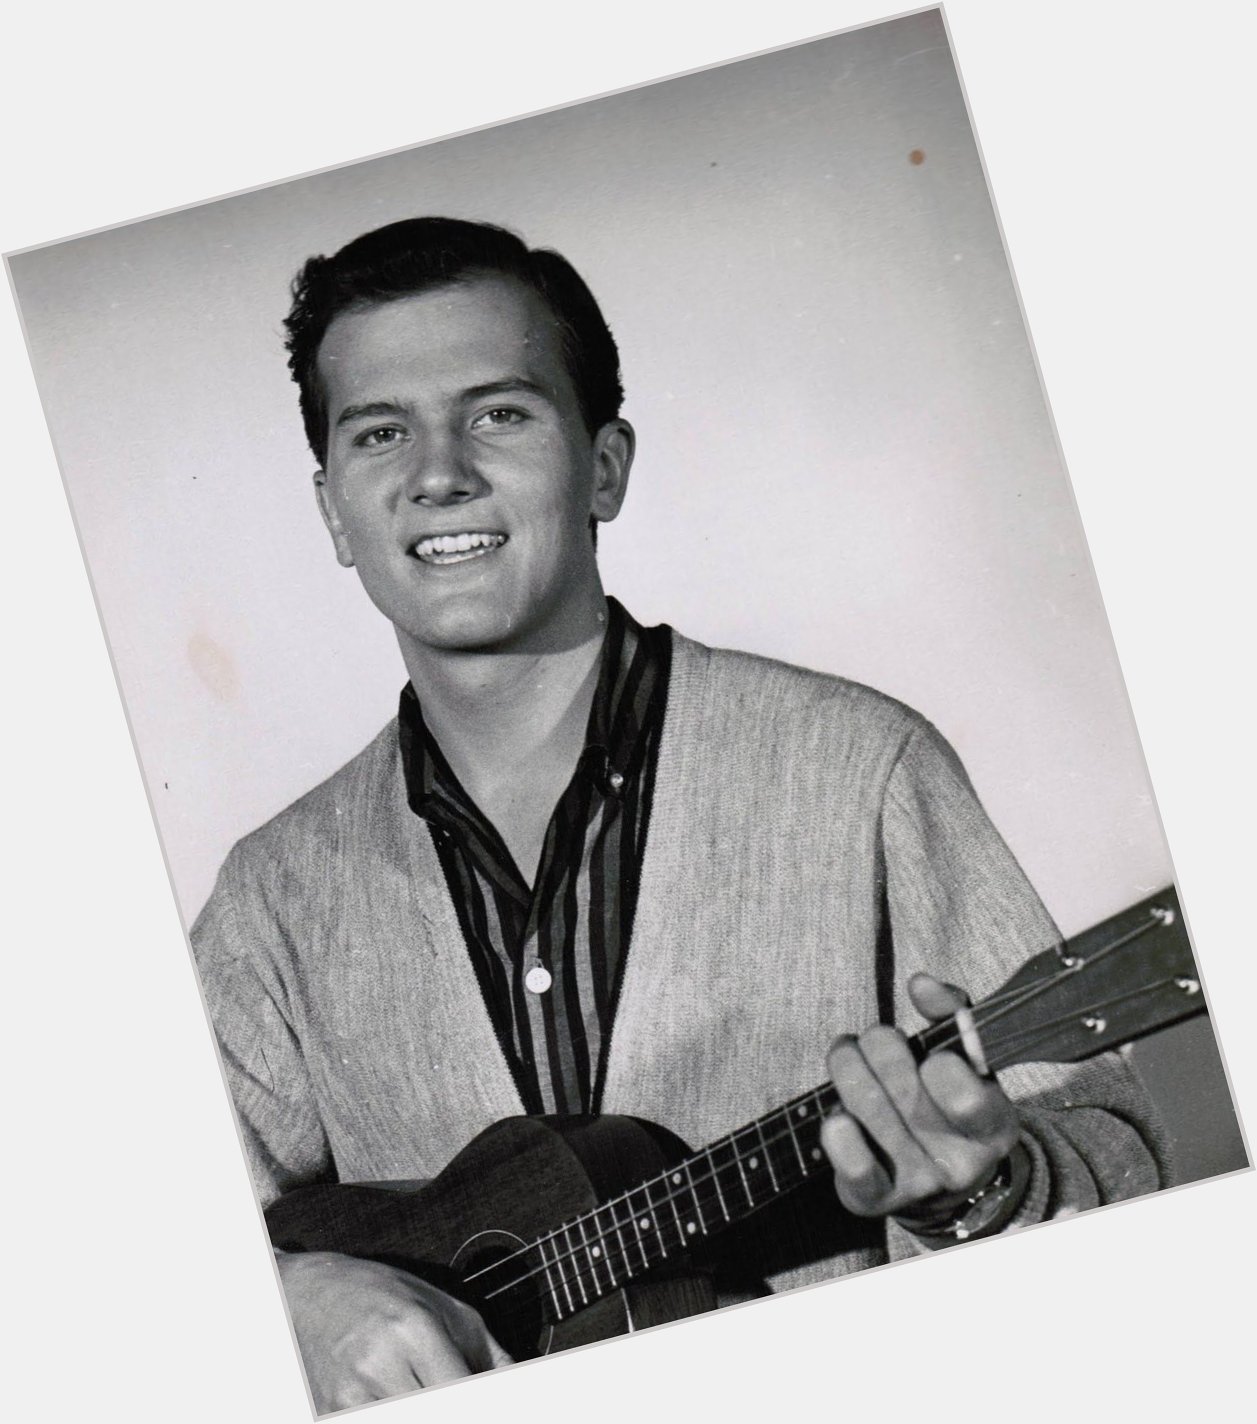 Happy Birthday to Pat Boone! He turns 84 today. 